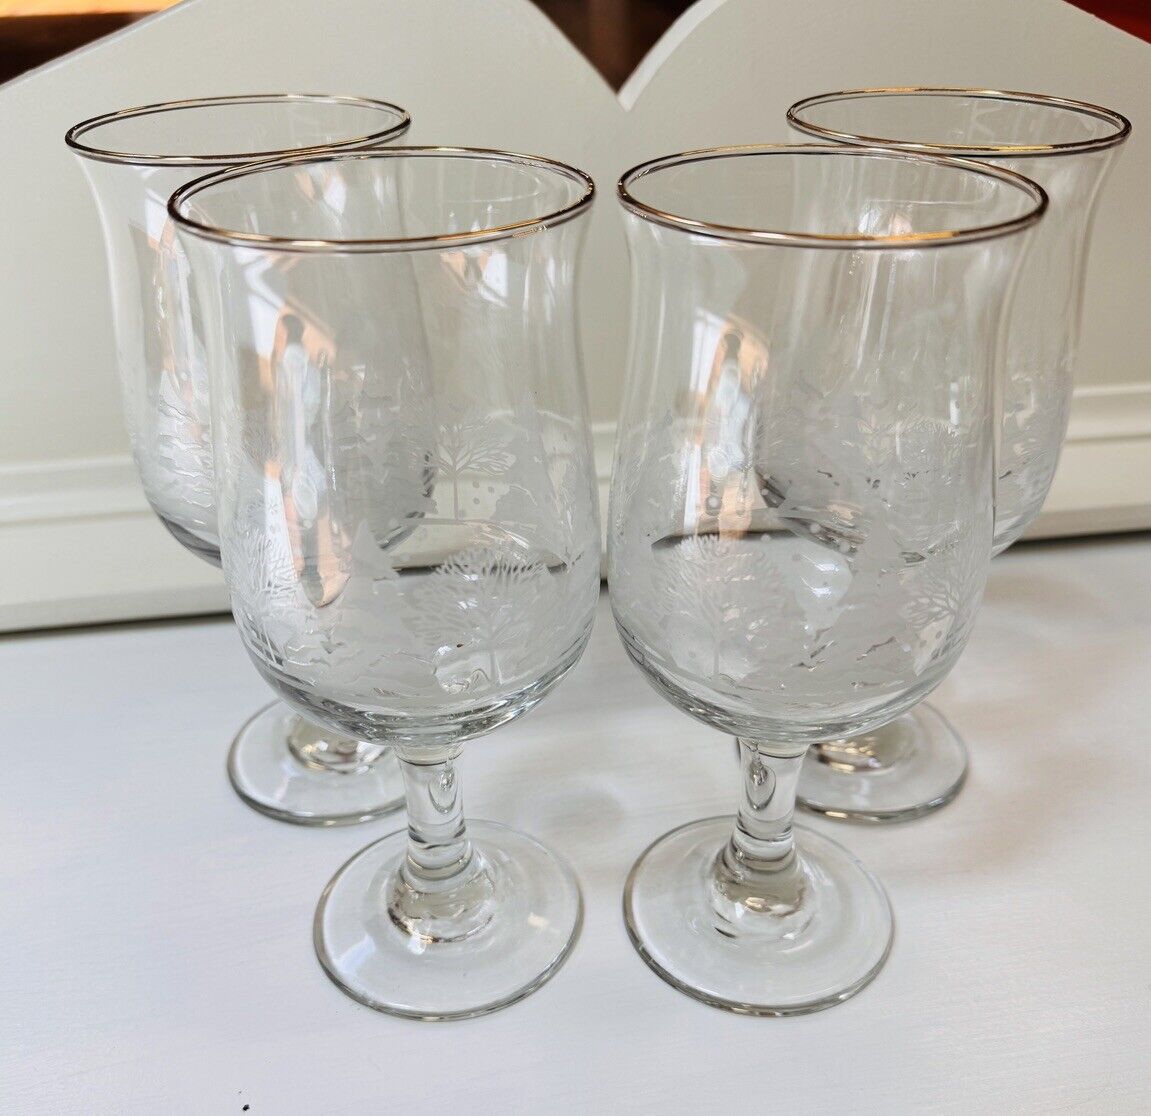 Vintage Libbey Arby’s Etched Snow Scene Wine Glasses w/ Gold Trim - Set Of 4